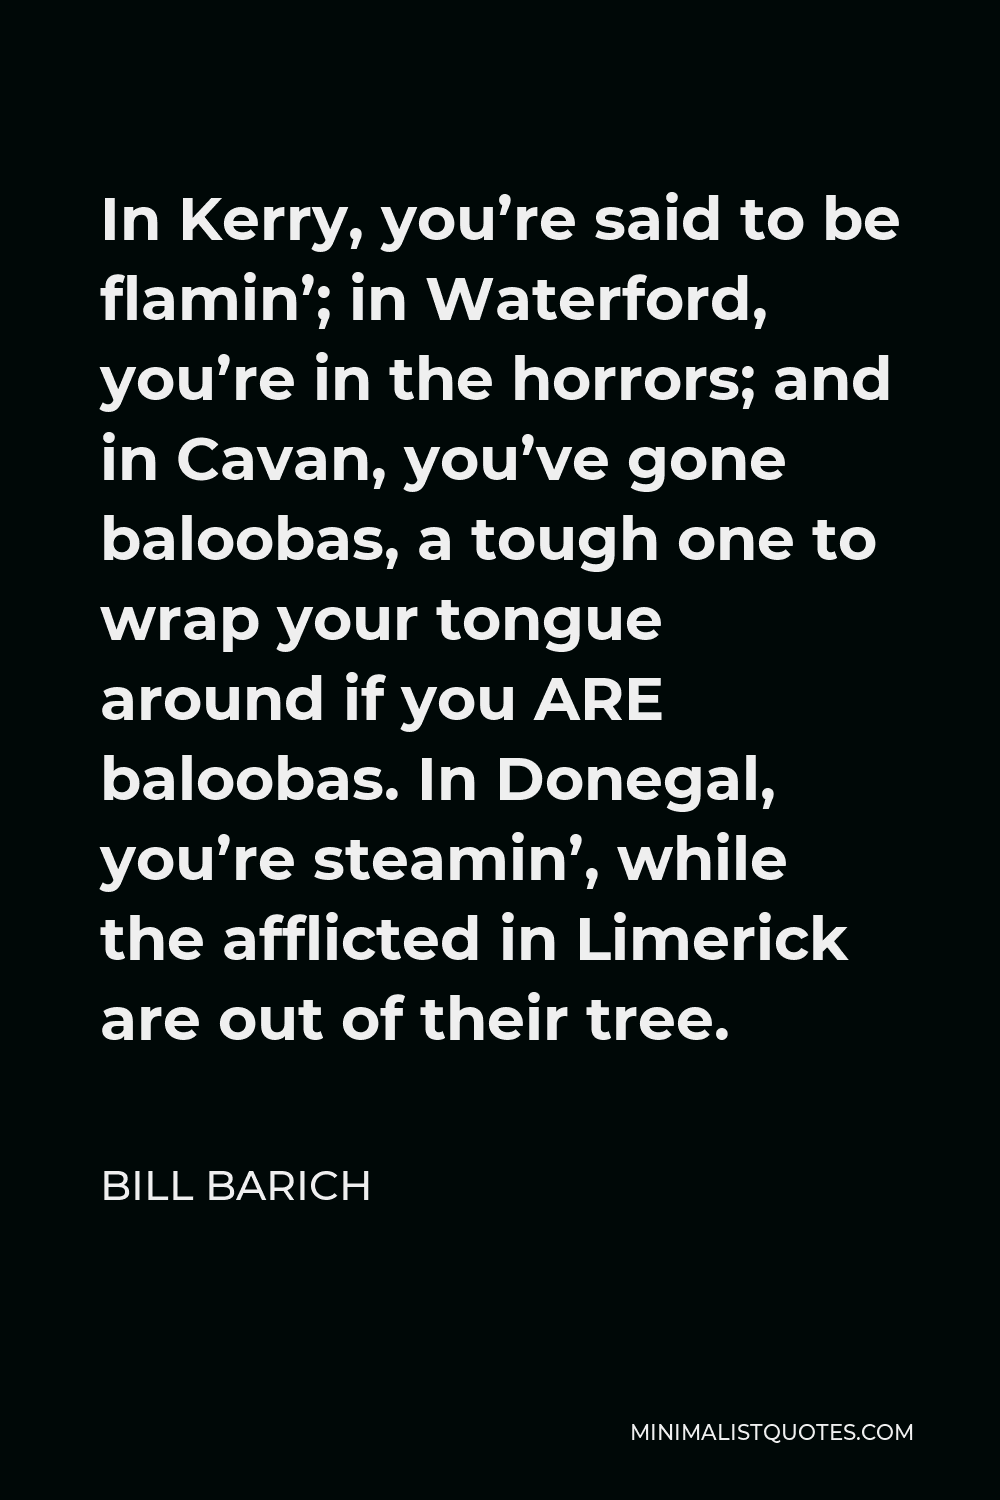 Bill Barich Quote - In Kerry, you’re said to be flamin’; in Waterford, you’re in the horrors; and in Cavan, you’ve gone baloobas, a tough one to wrap your tongue around if you ARE baloobas. In Donegal, you’re steamin’, while the afflicted in Limerick are out of their tree.